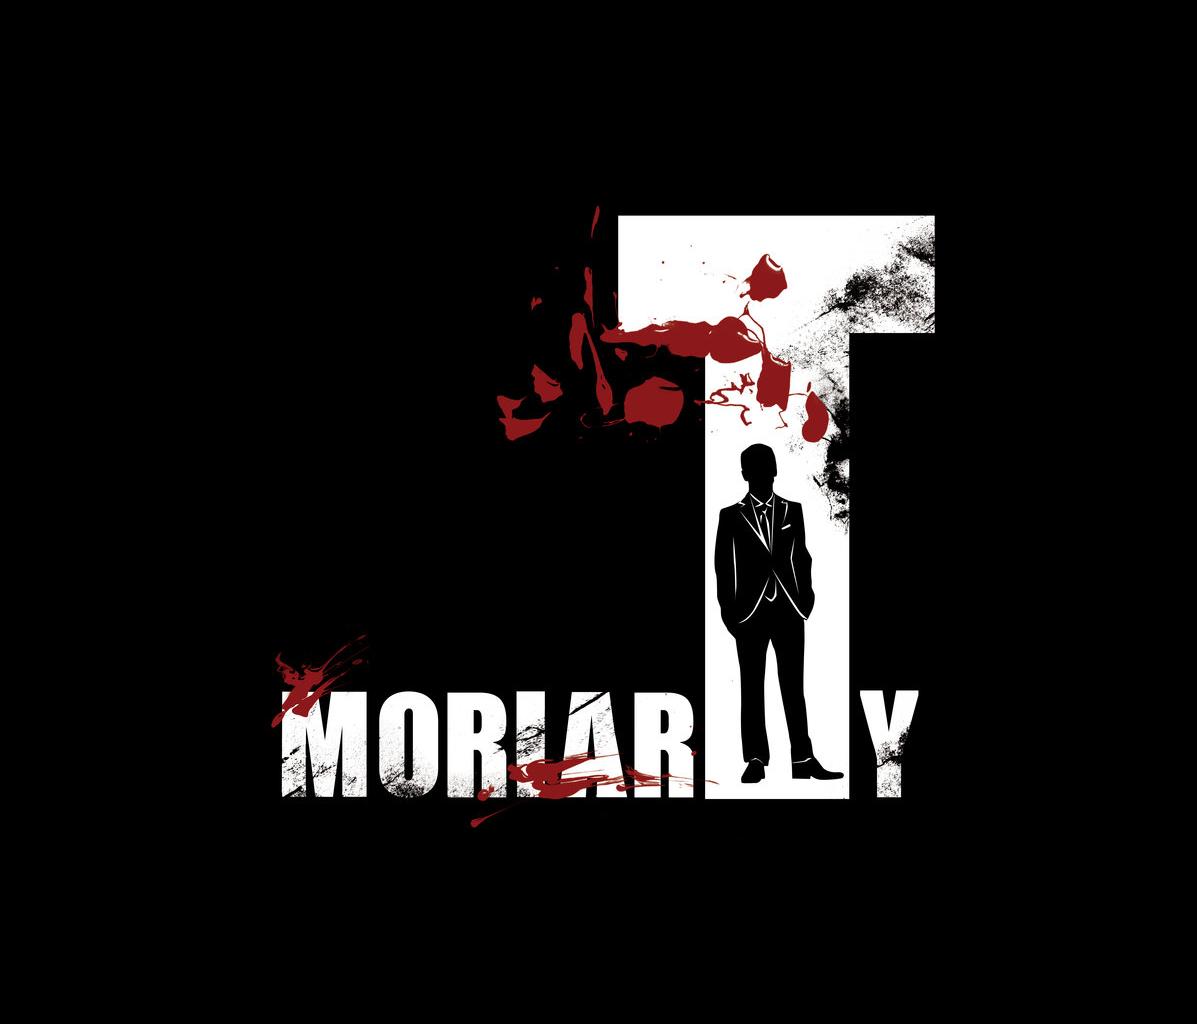 Jim Moriarty Image Moirarty HD Wallpaper And Background Photos